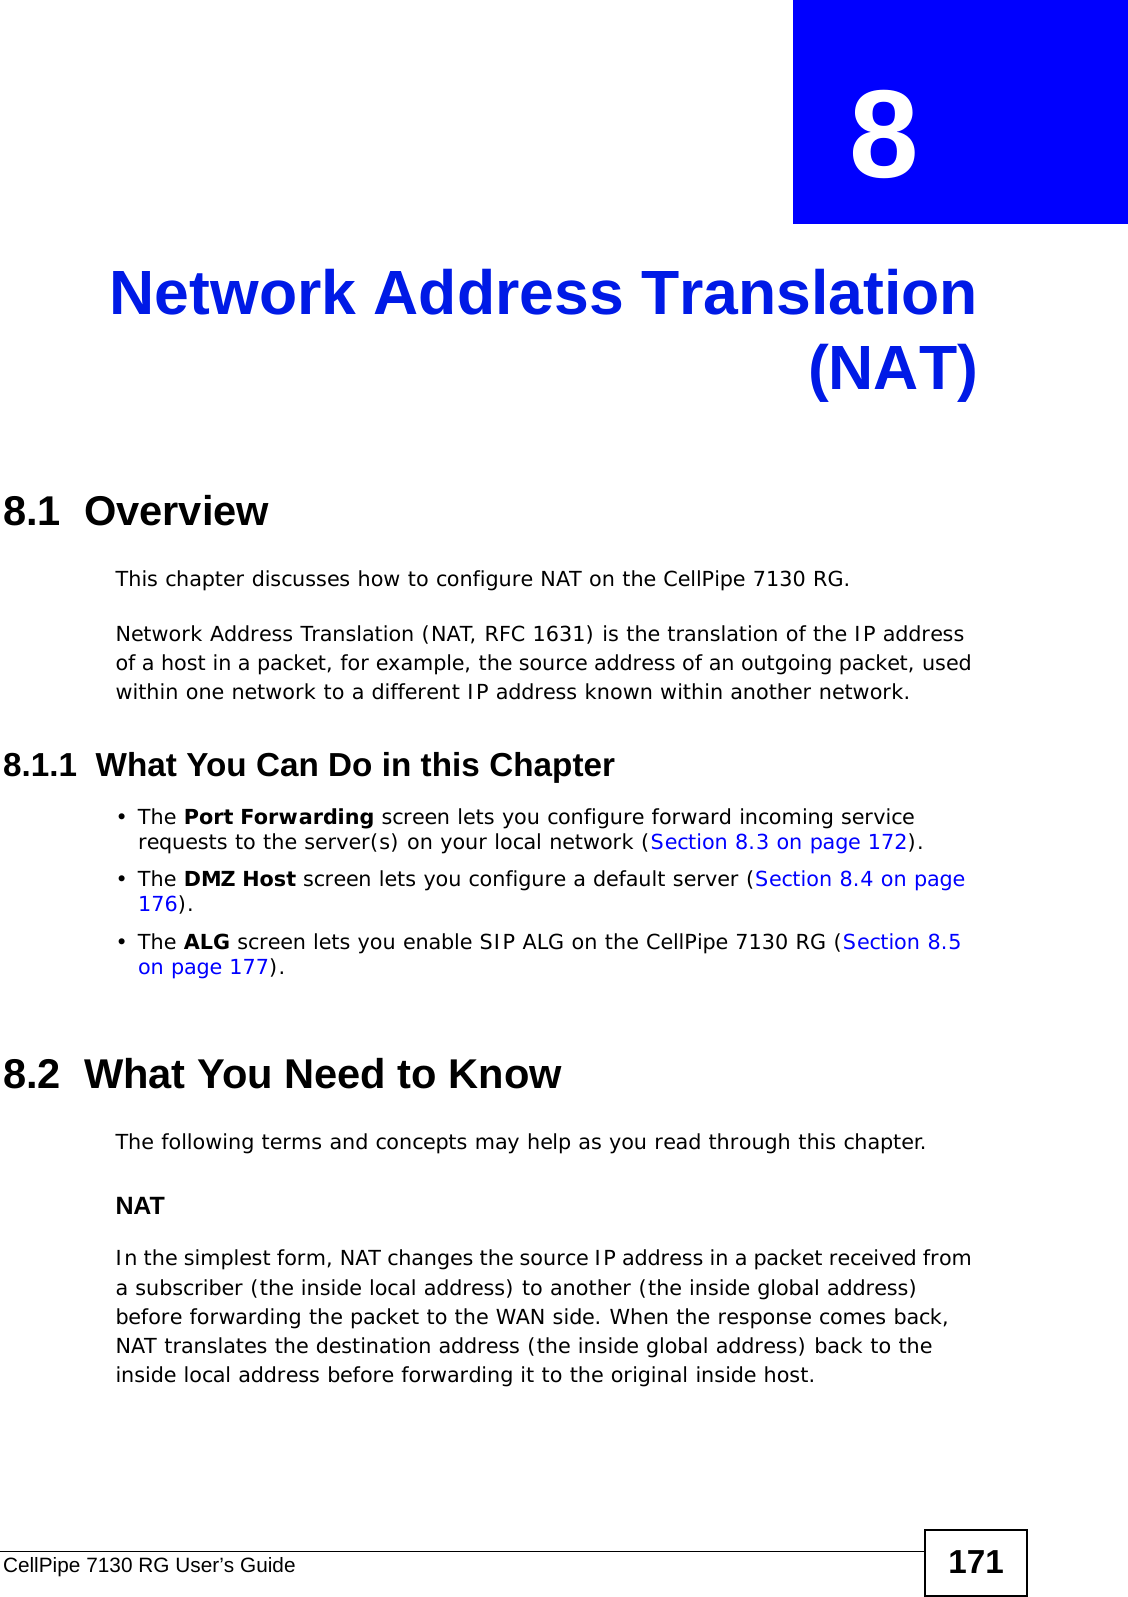 CellPipe 7130 RG User’s Guide 171CHAPTER  8 Network Address Translation(NAT)8.1  Overview This chapter discusses how to configure NAT on the CellPipe 7130 RG.Network Address Translation (NAT, RFC 1631) is the translation of the IP address of a host in a packet, for example, the source address of an outgoing packet, used within one network to a different IP address known within another network. 8.1.1  What You Can Do in this Chapter•The Port Forwarding screen lets you configure forward incoming service requests to the server(s) on your local network (Section 8.3 on page 172).•The DMZ Host screen lets you configure a default server (Section 8.4 on page 176).•The ALG screen lets you enable SIP ALG on the CellPipe 7130 RG (Section 8.5 on page 177).8.2  What You Need to KnowThe following terms and concepts may help as you read through this chapter.NATIn the simplest form, NAT changes the source IP address in a packet received from a subscriber (the inside local address) to another (the inside global address) before forwarding the packet to the WAN side. When the response comes back, NAT translates the destination address (the inside global address) back to the inside local address before forwarding it to the original inside host.